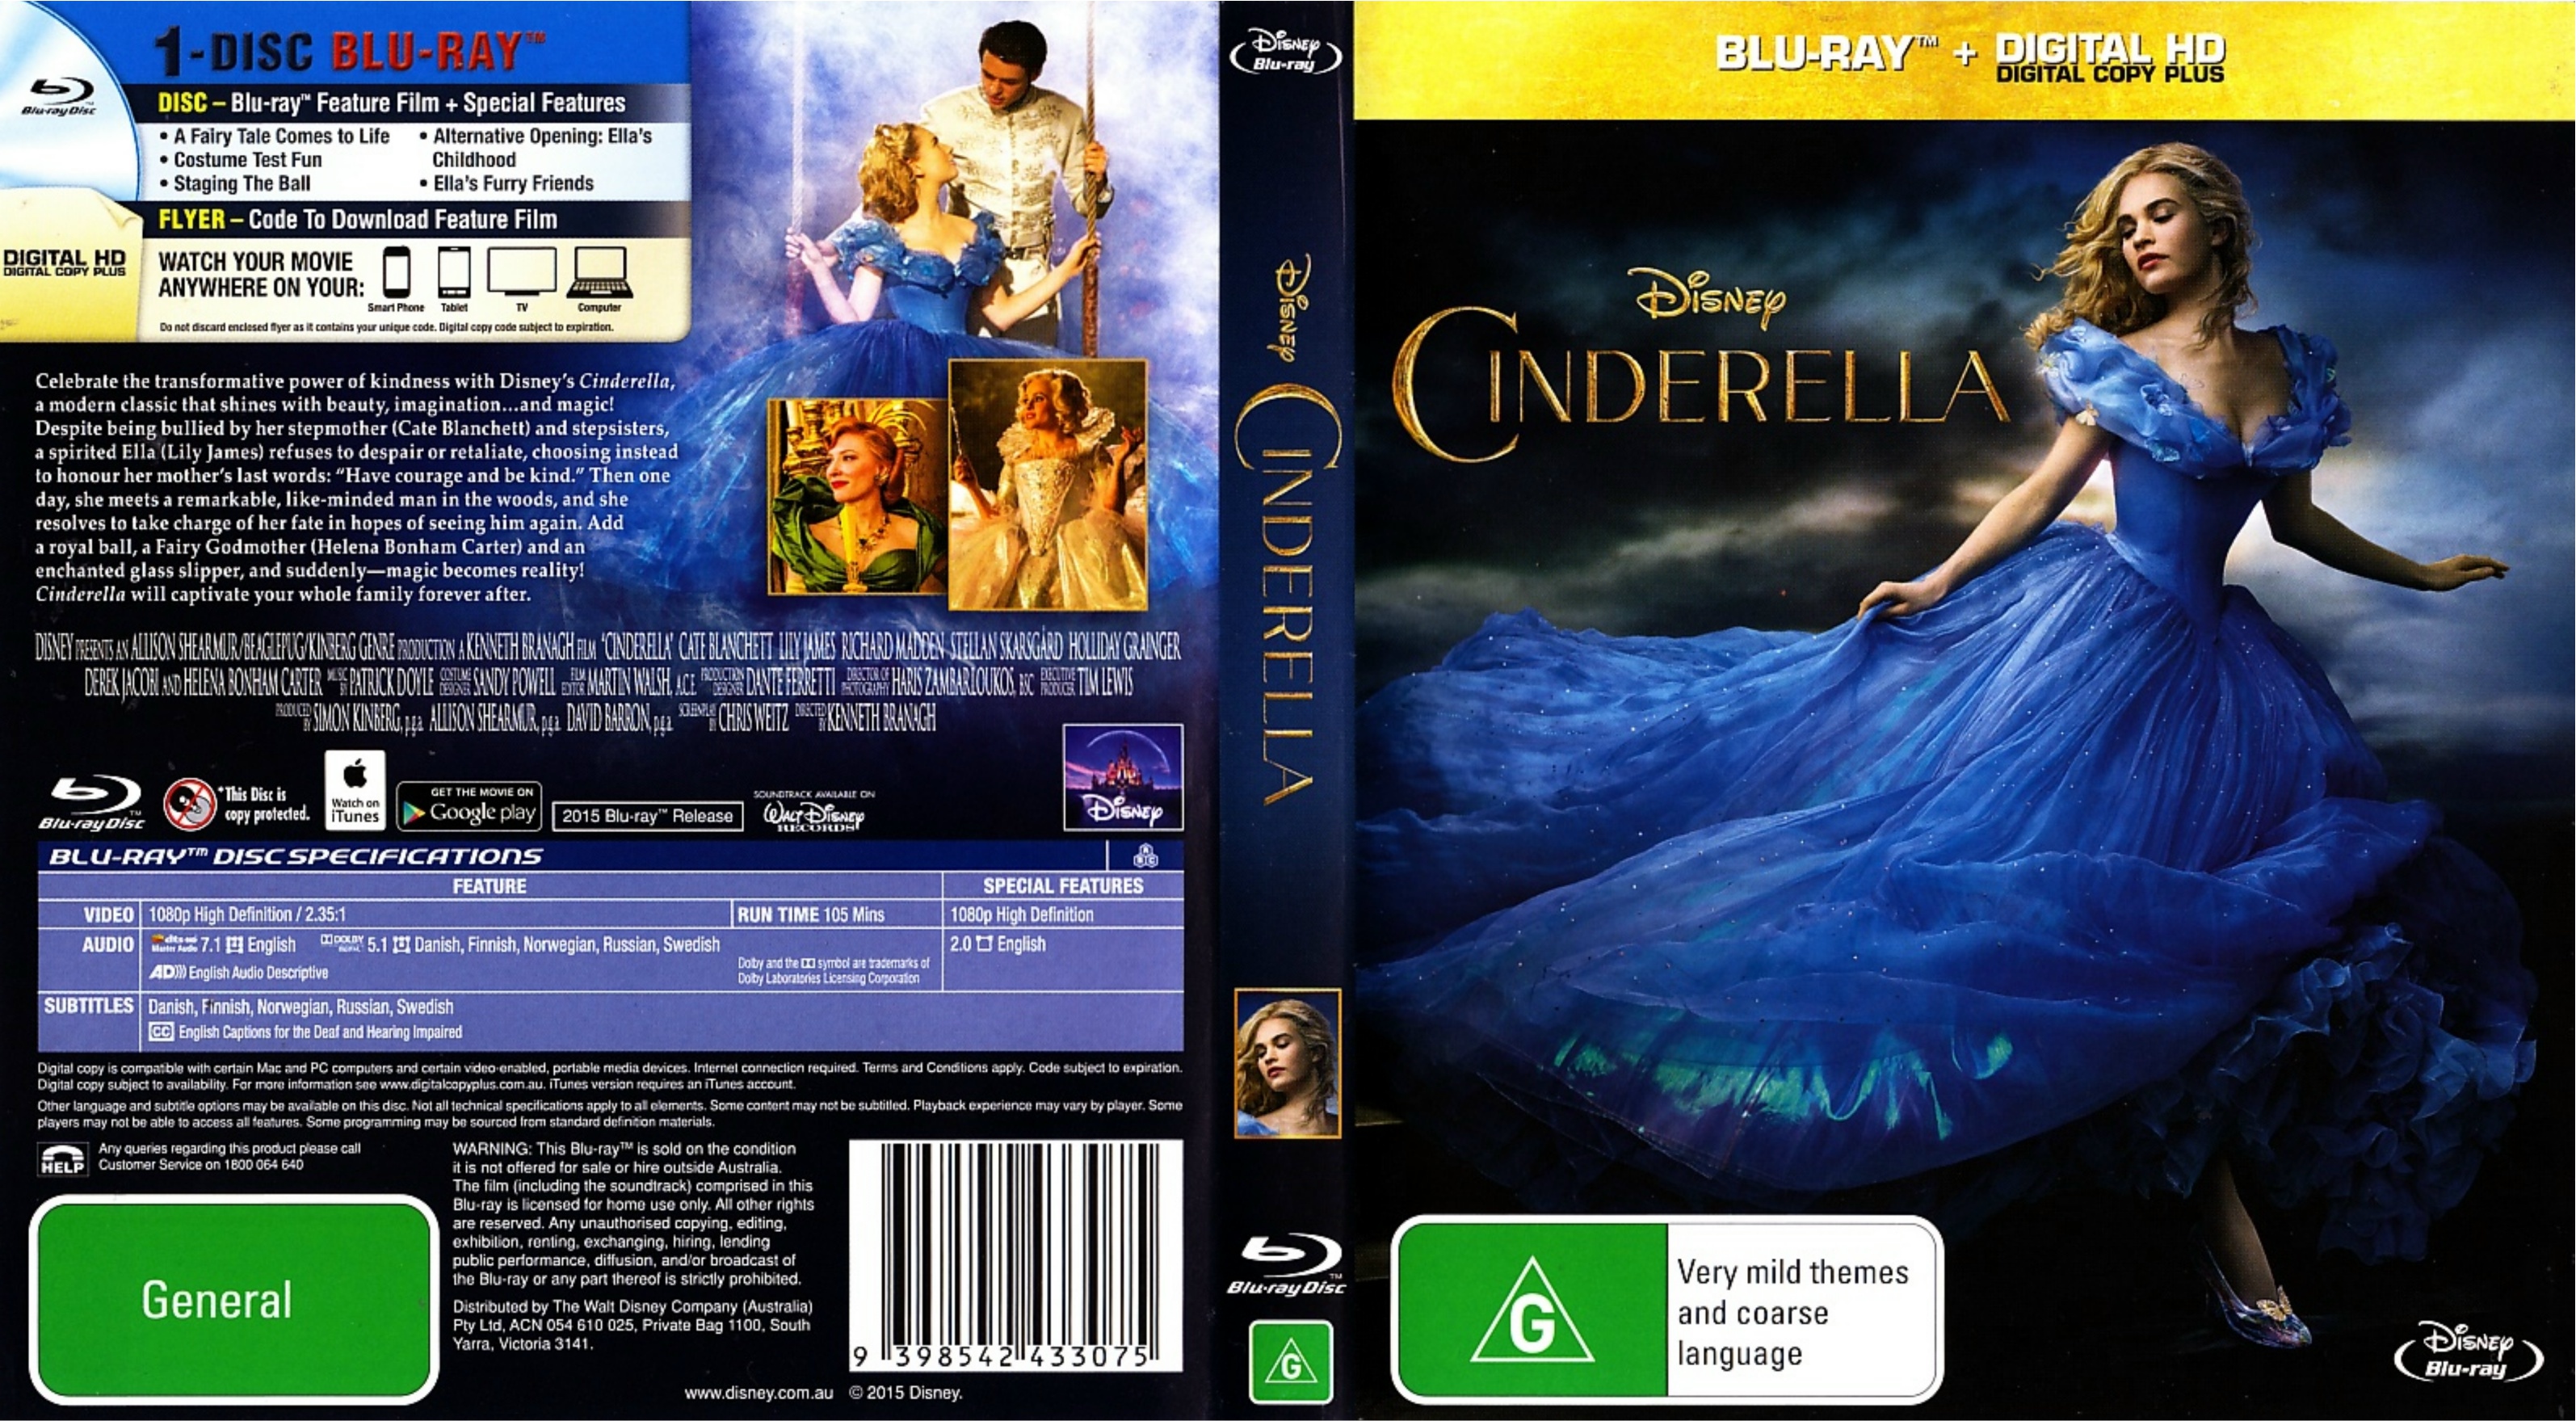 Datum Idioot Kreunt cinderella 2015 r4 front blu-ray | DVD Covers | Cover Century | Over  1.000.000 Album Art covers for free